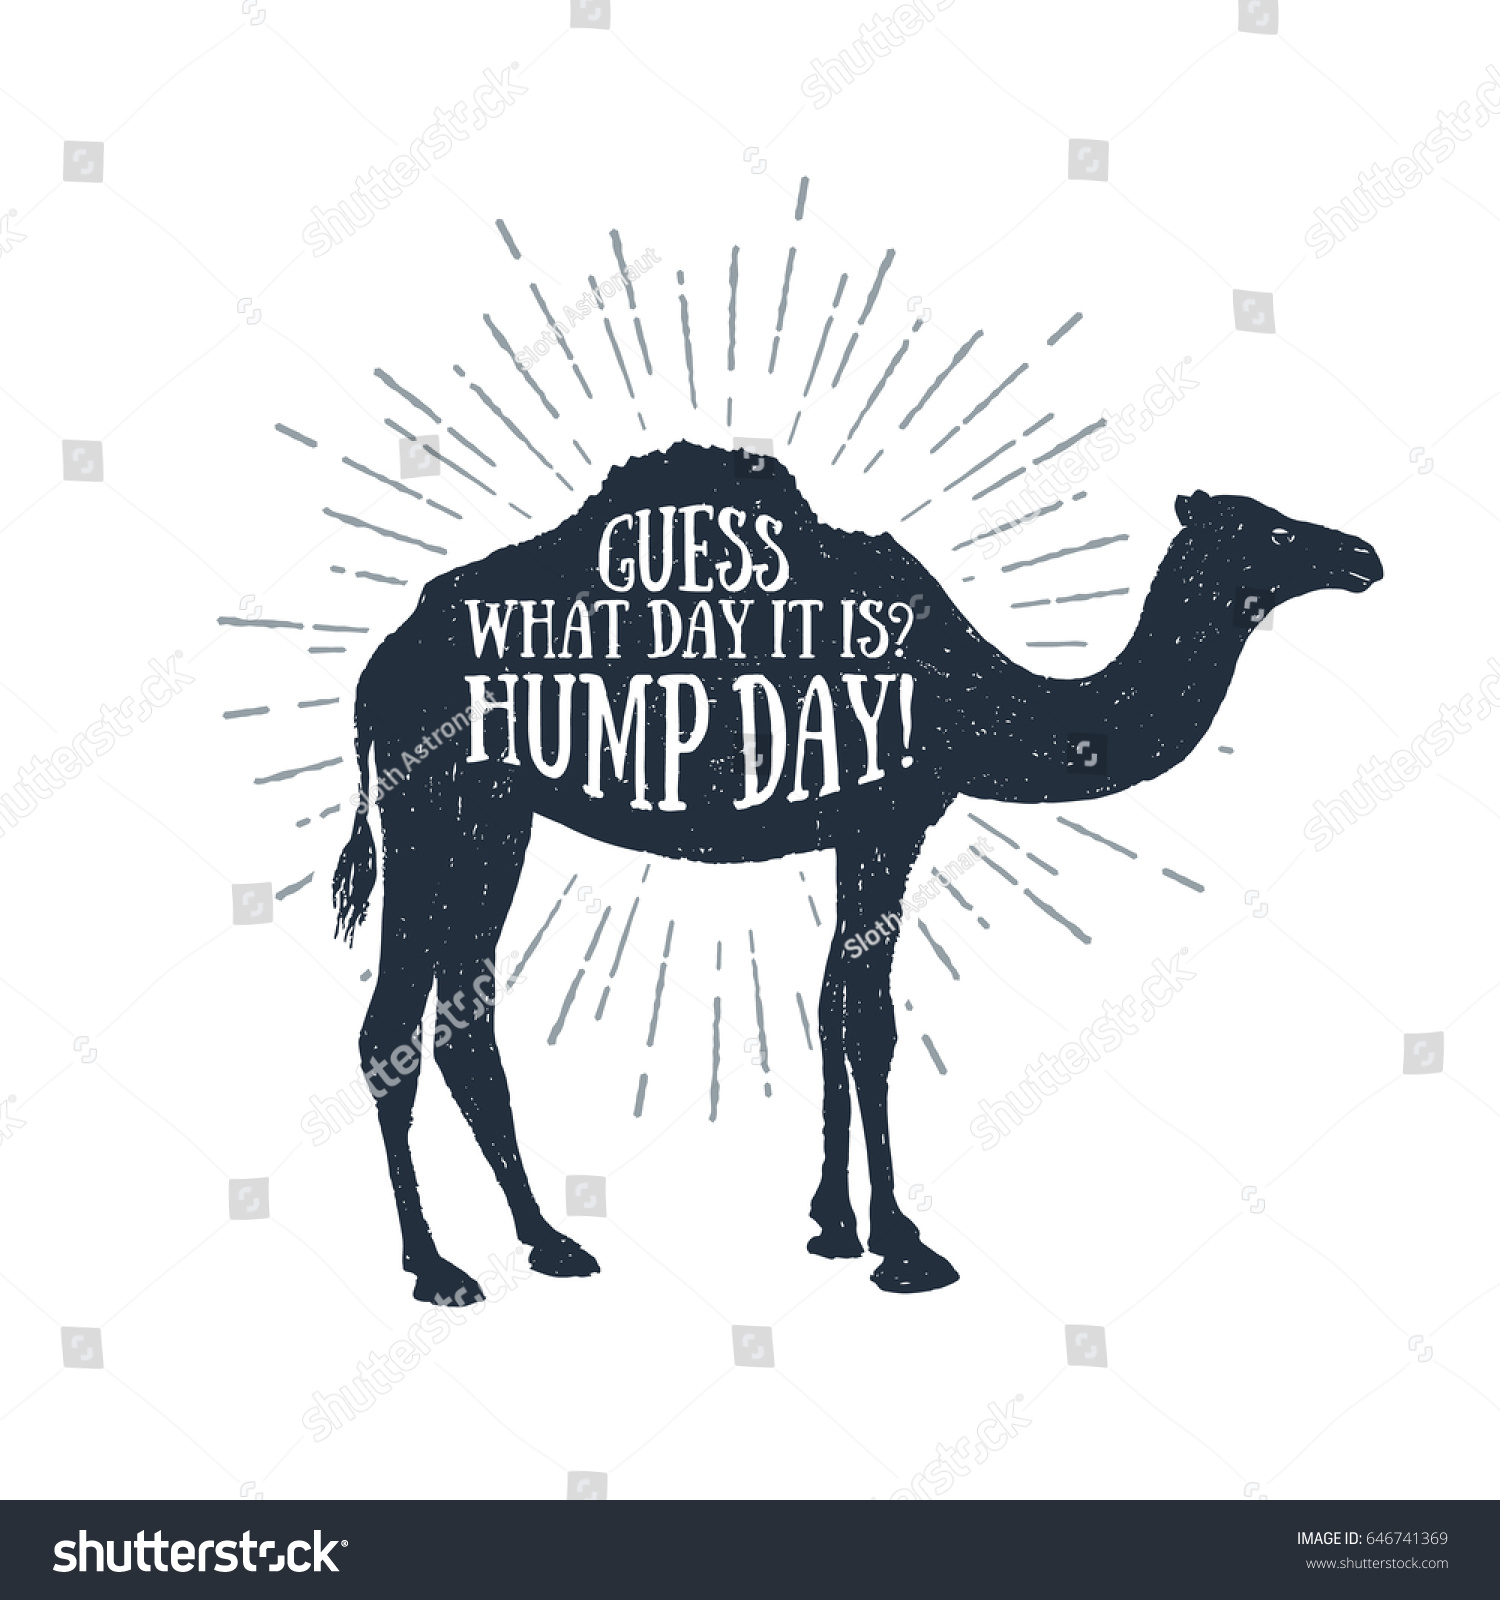 Hump Day Image the inside